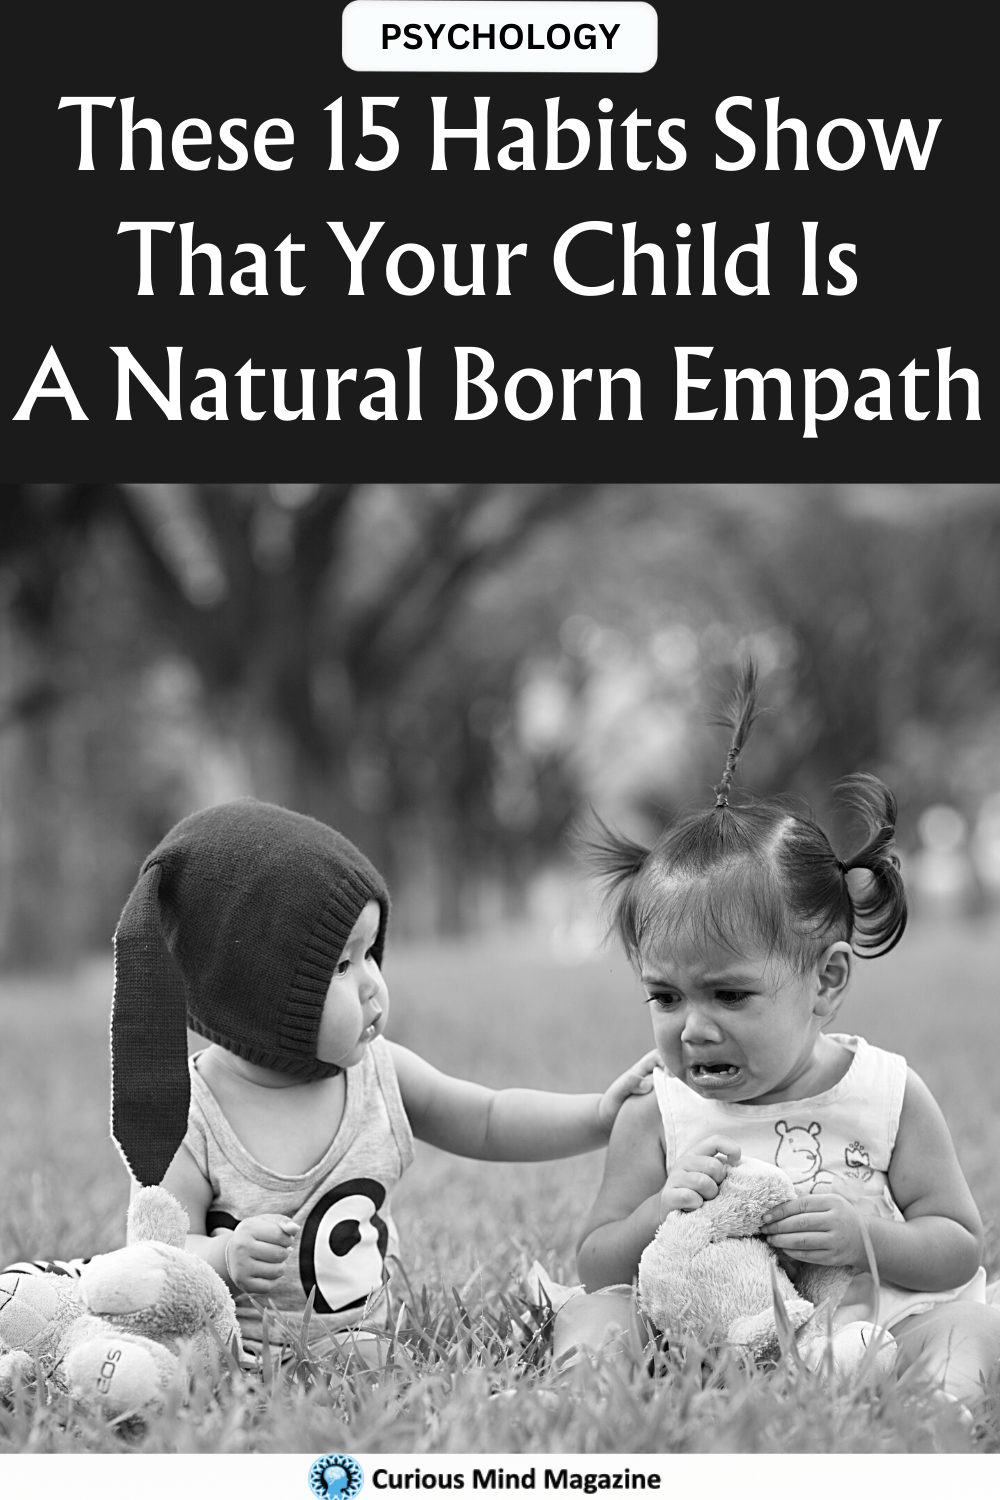 These 15 Habits Show That Your Child Is A Natural Born Empath